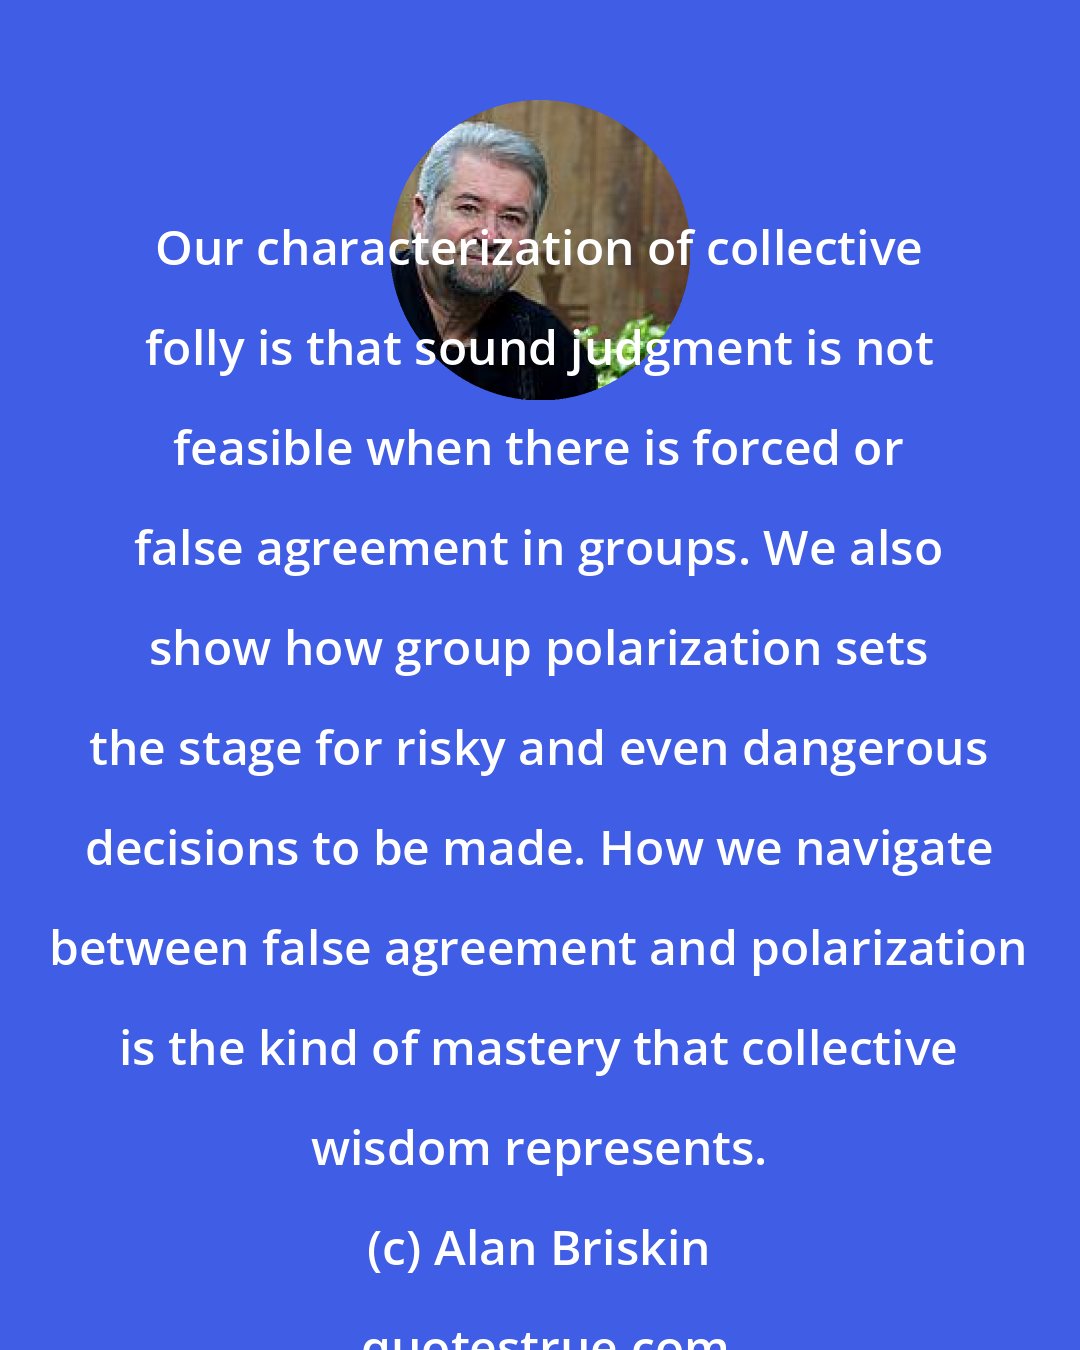 Alan Briskin: Our characterization of collective folly is that sound judgment is not feasible when there is forced or false agreement in groups. We also show how group polarization sets the stage for risky and even dangerous decisions to be made. How we navigate between false agreement and polarization is the kind of mastery that collective wisdom represents.